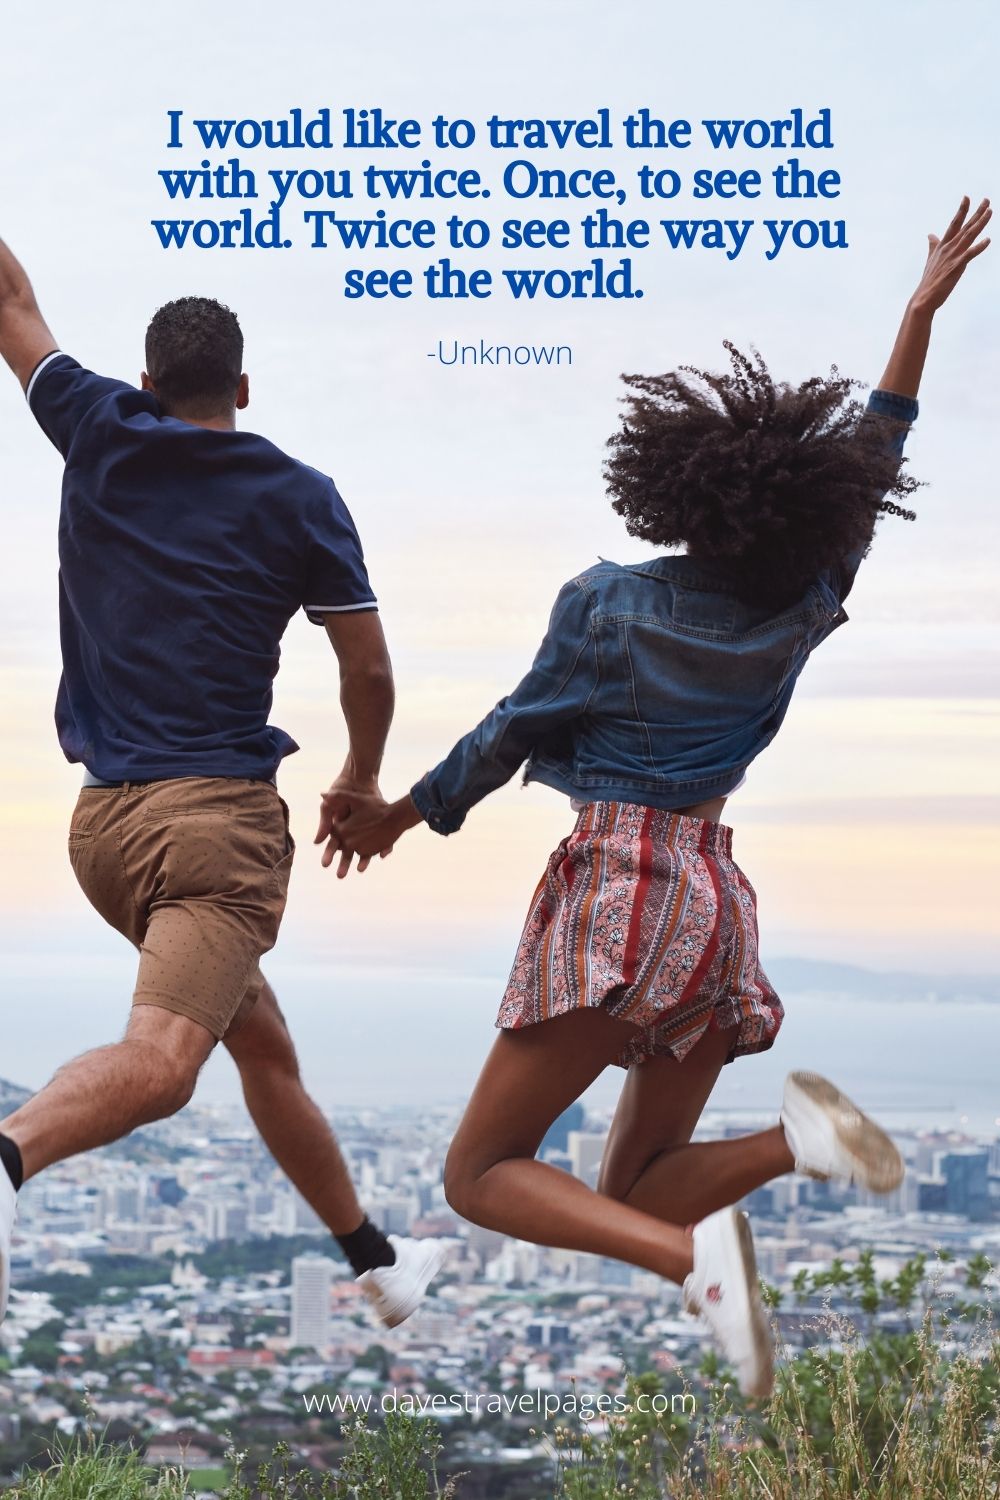 I would like to travel the world with you twice. Once, to see the world. Twice to see the way you see the world.: Adventure Couple Quotes